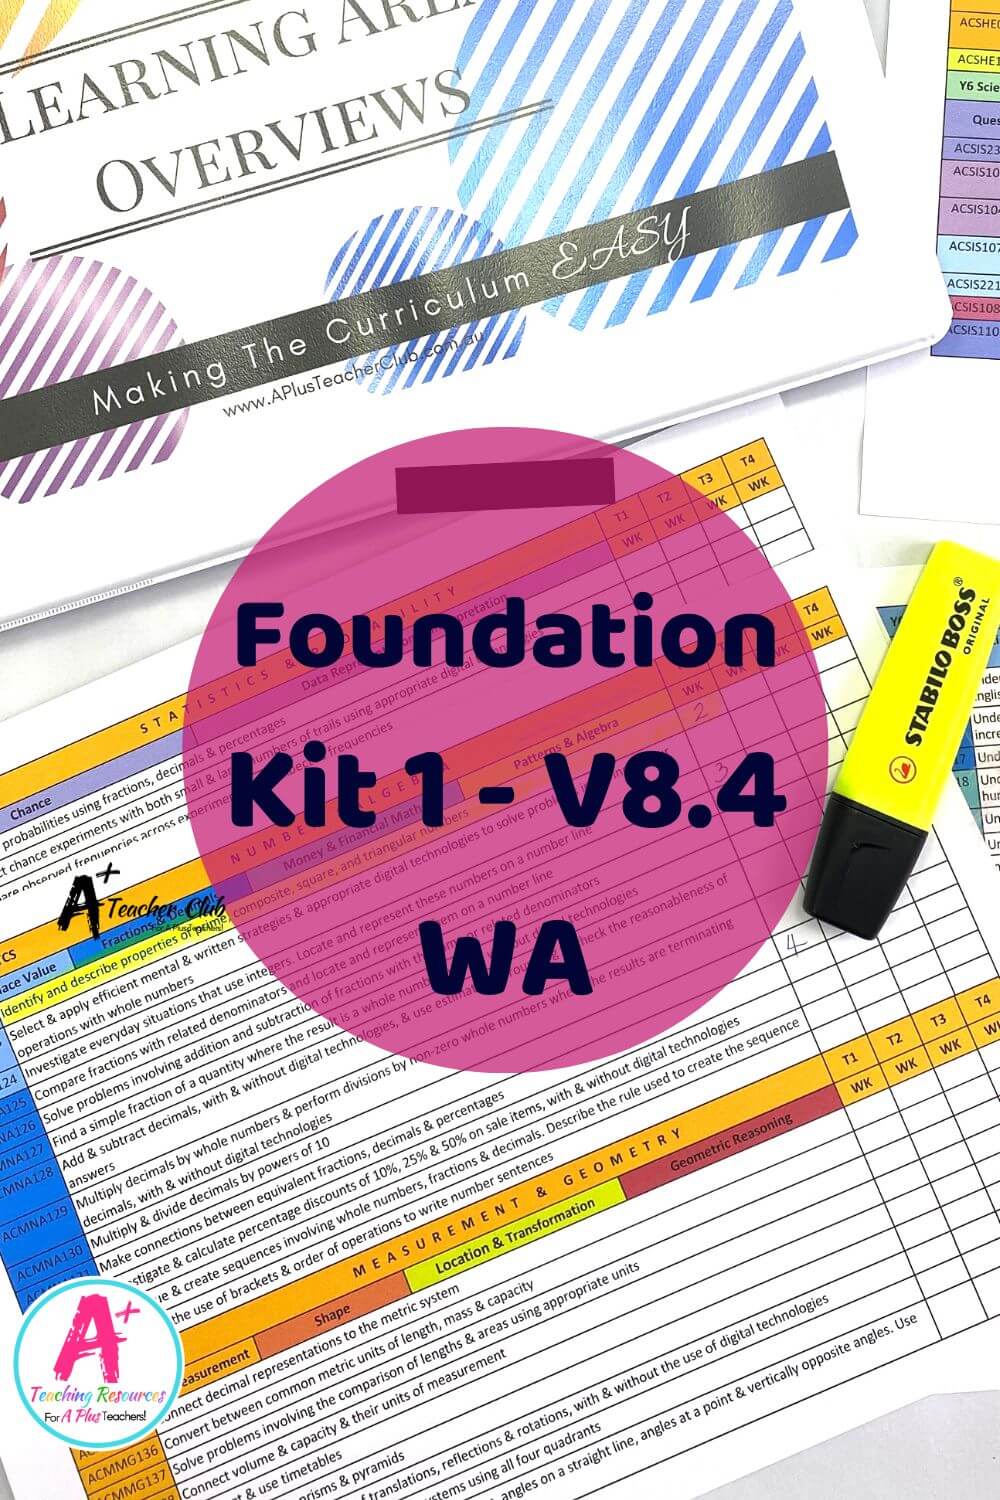 Foundation Years Forward Planning Curriculum Overview WA V8.4